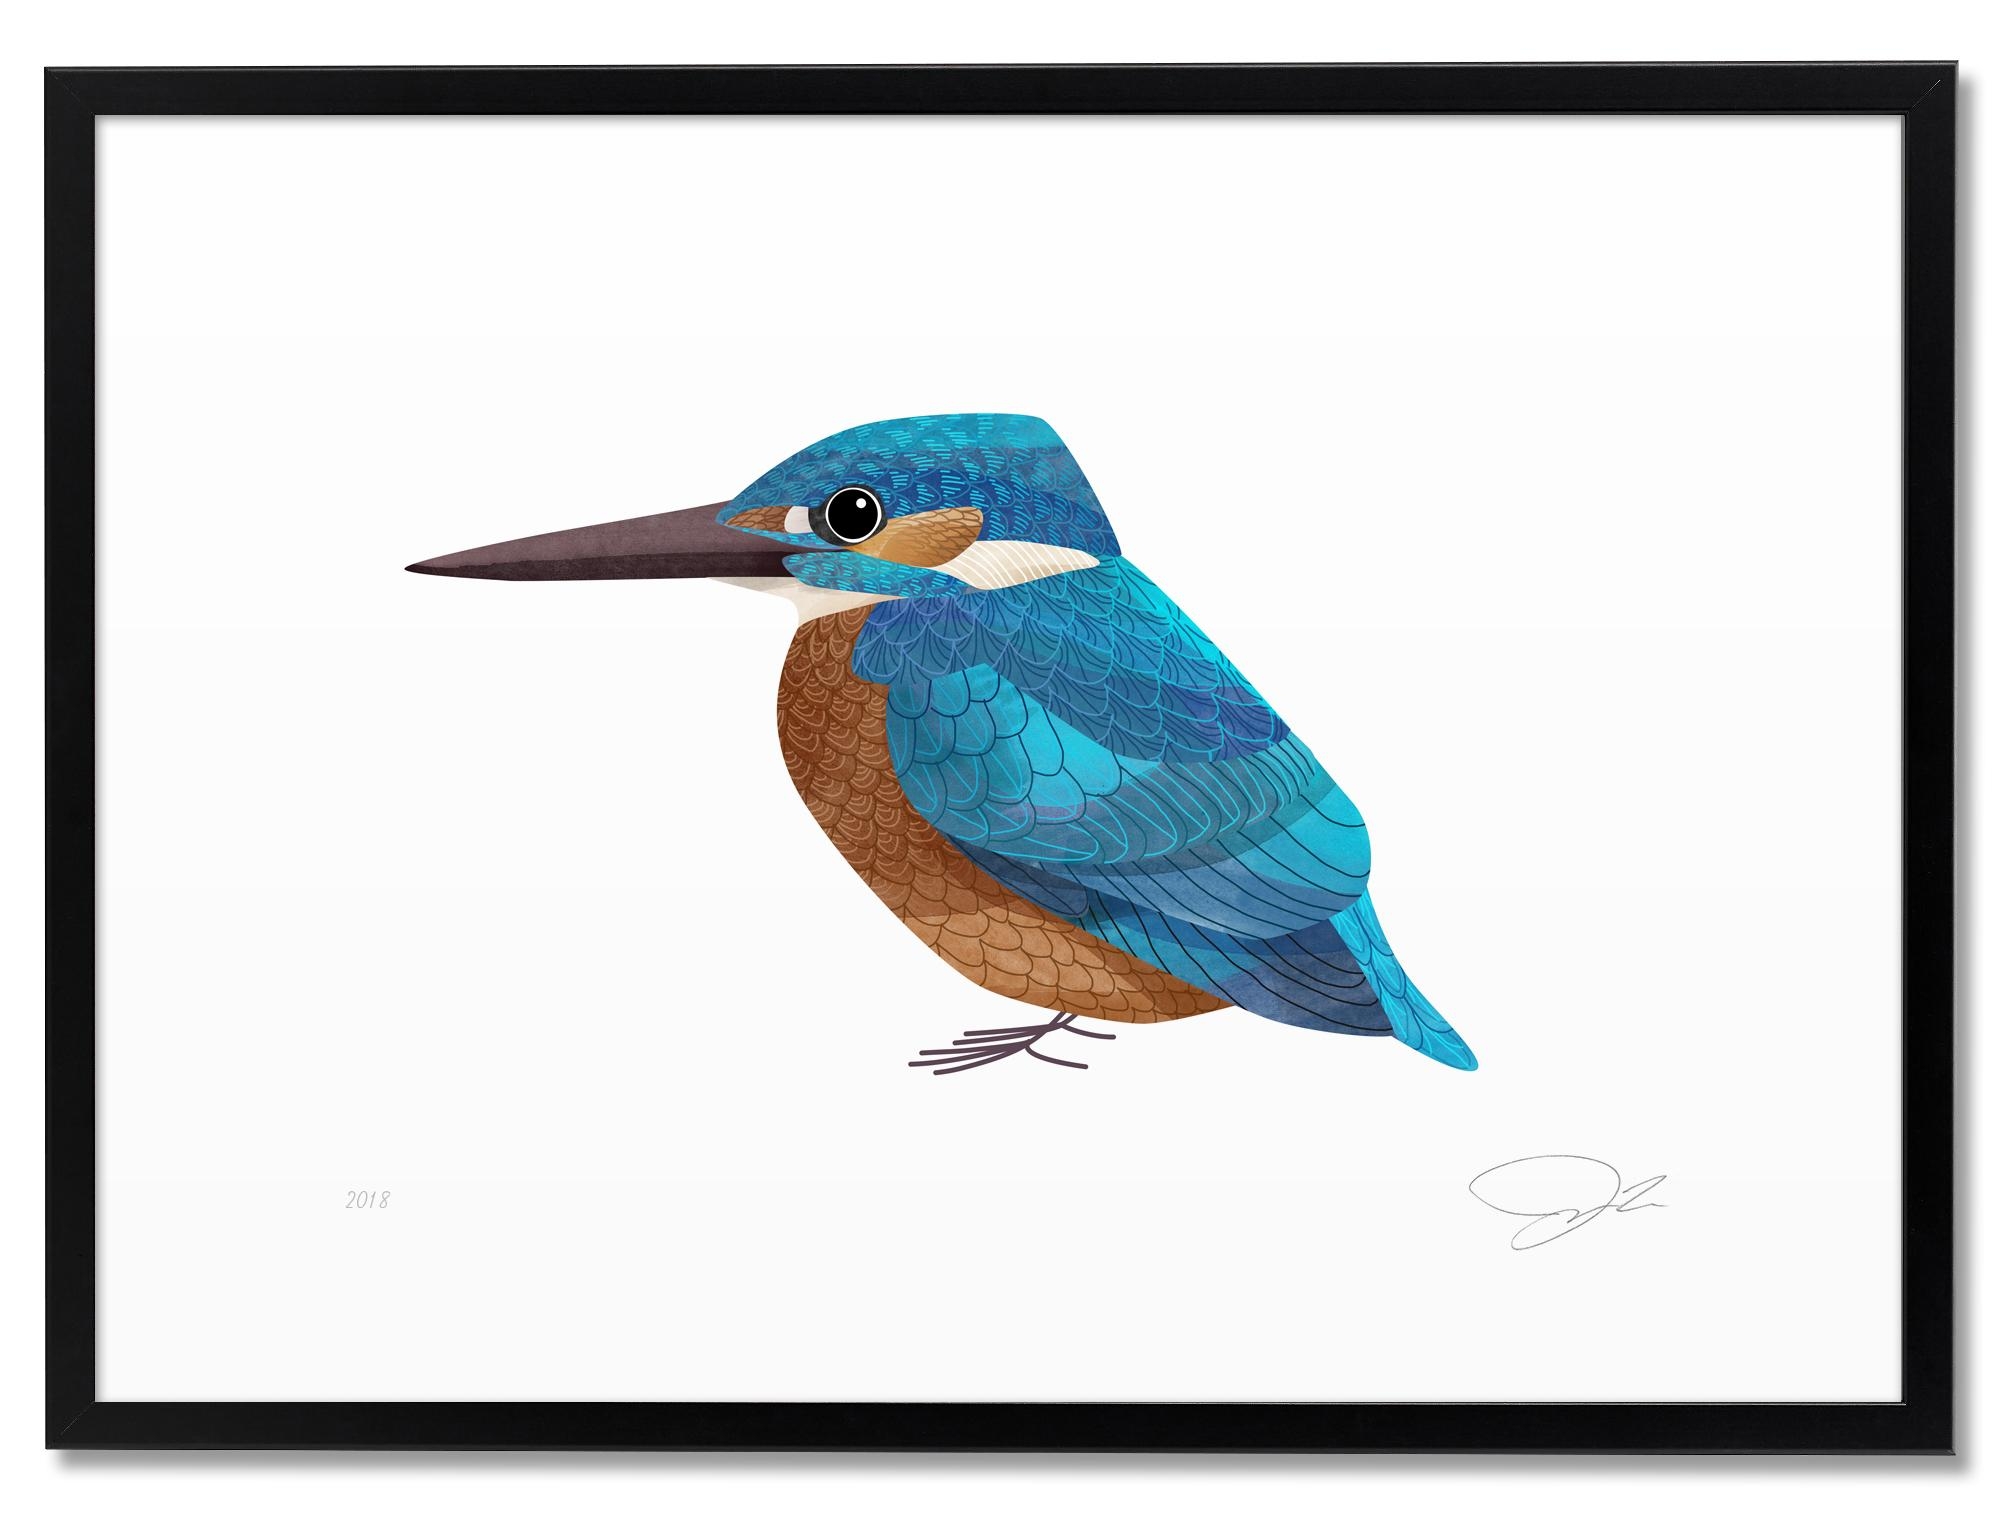 A king fisher by me. One of my favourite birds. You can see them in the ponds near home. #illustration #prints #drucke